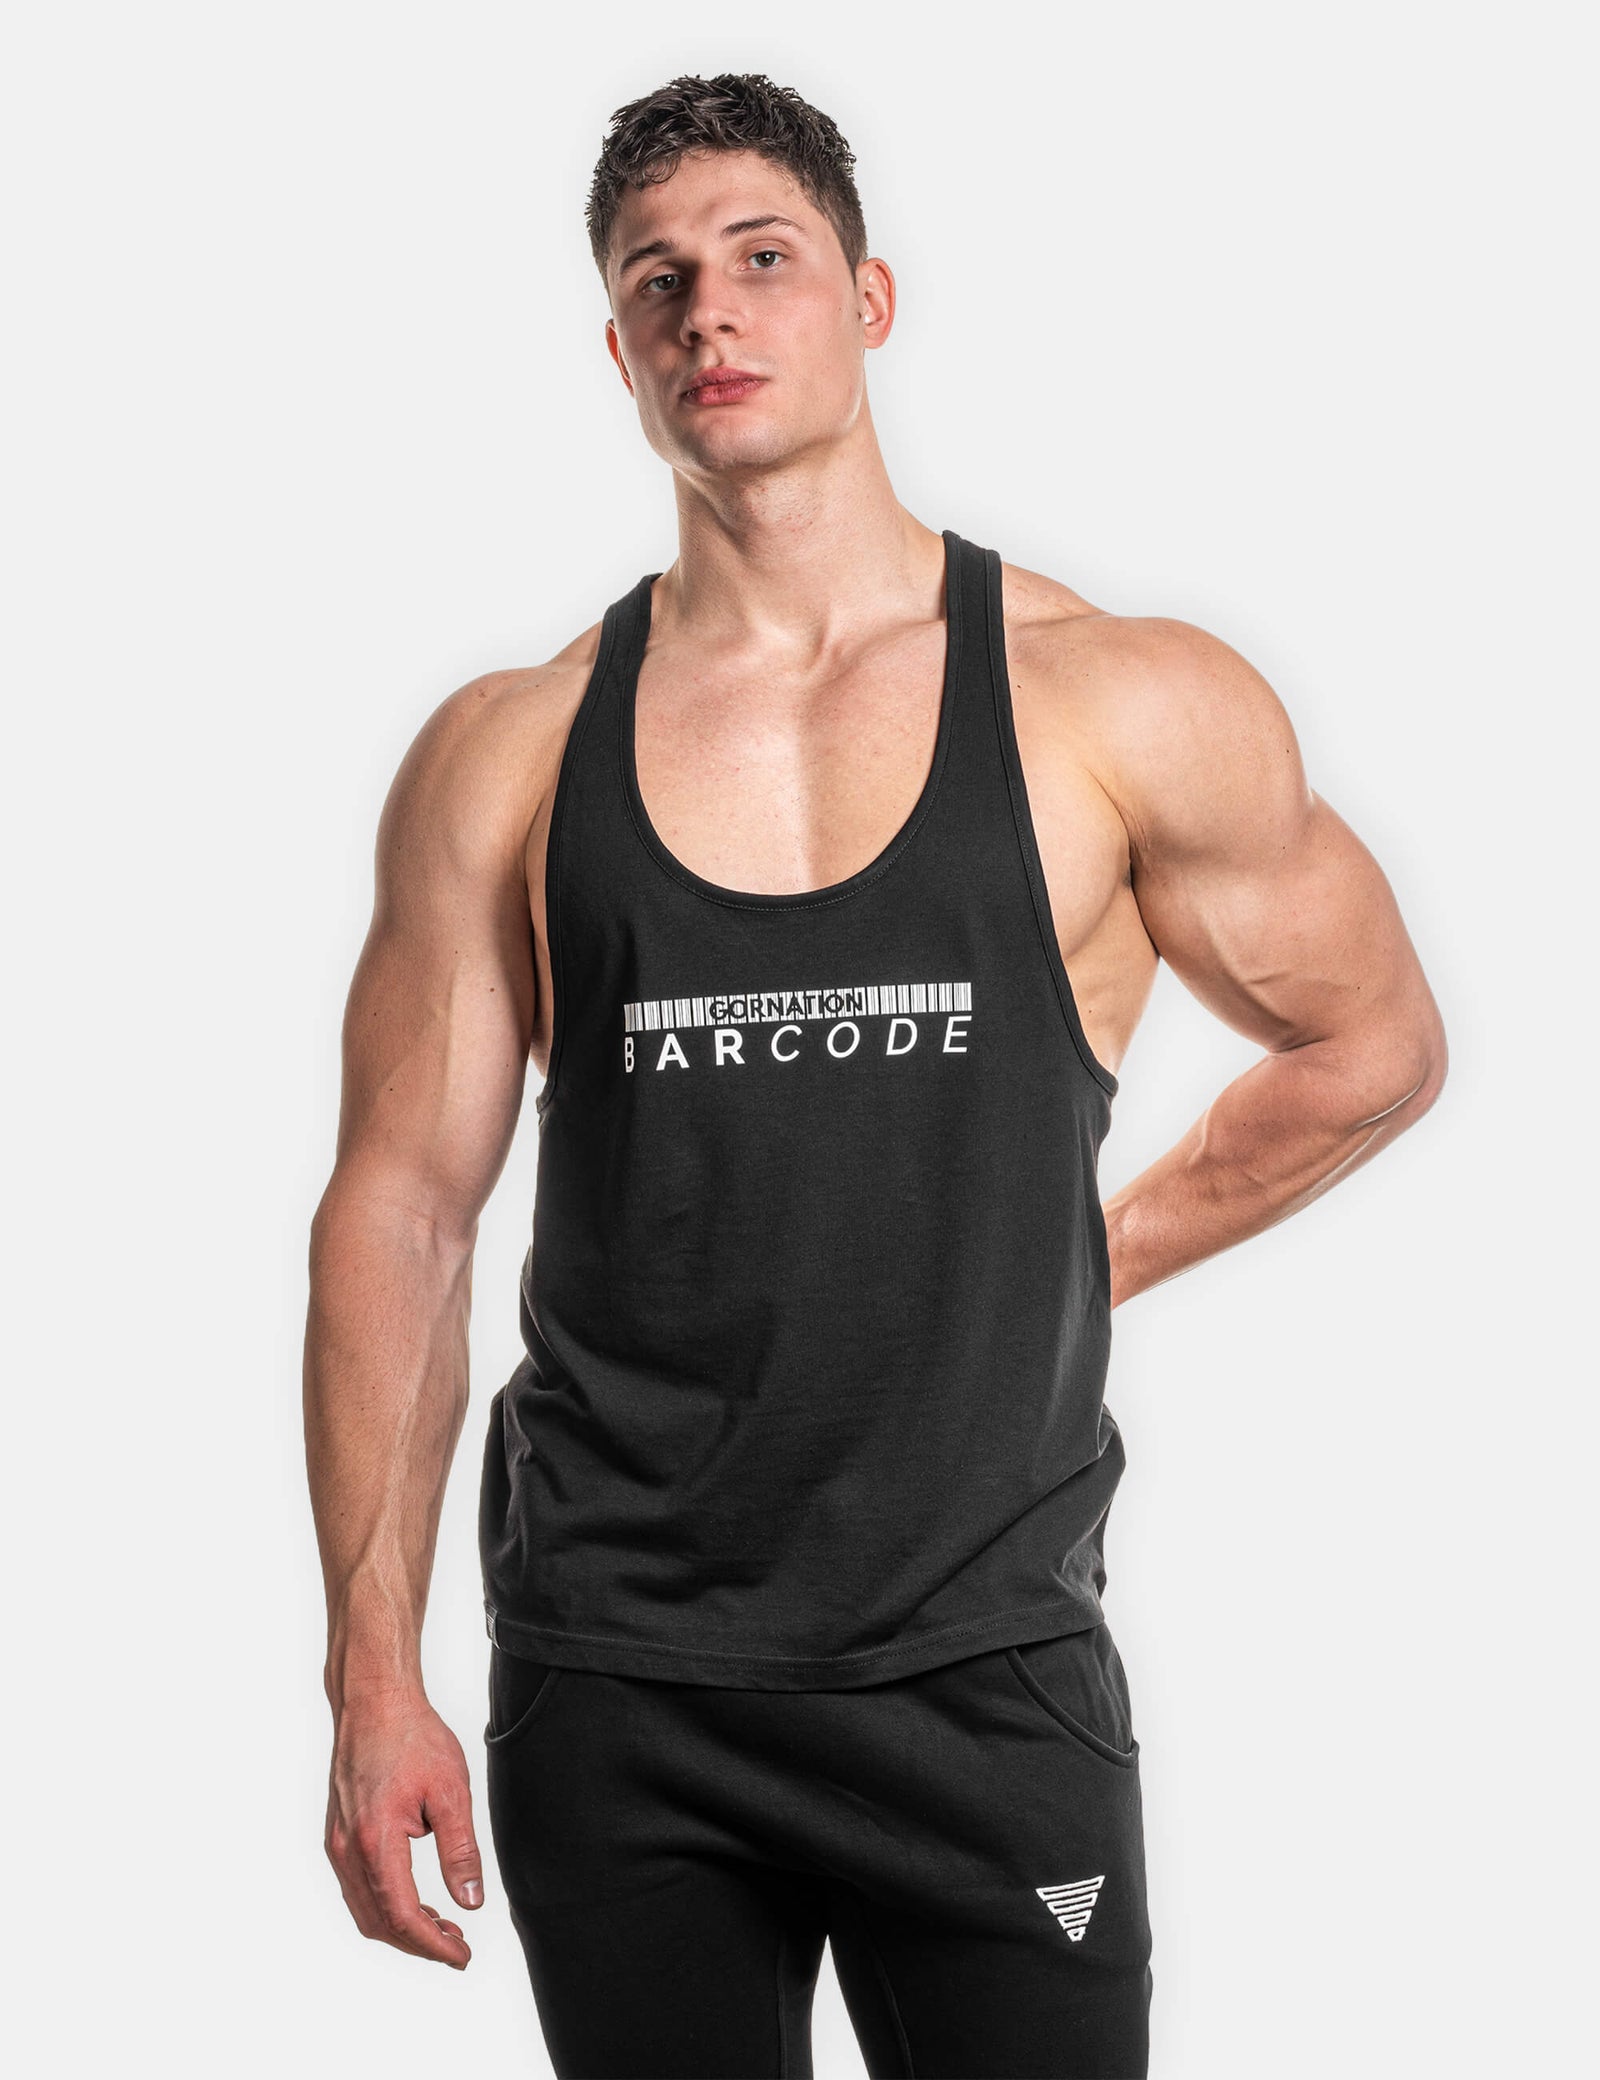 MEN: Clothing for your Calisthenics and Street Workout | GORNATION